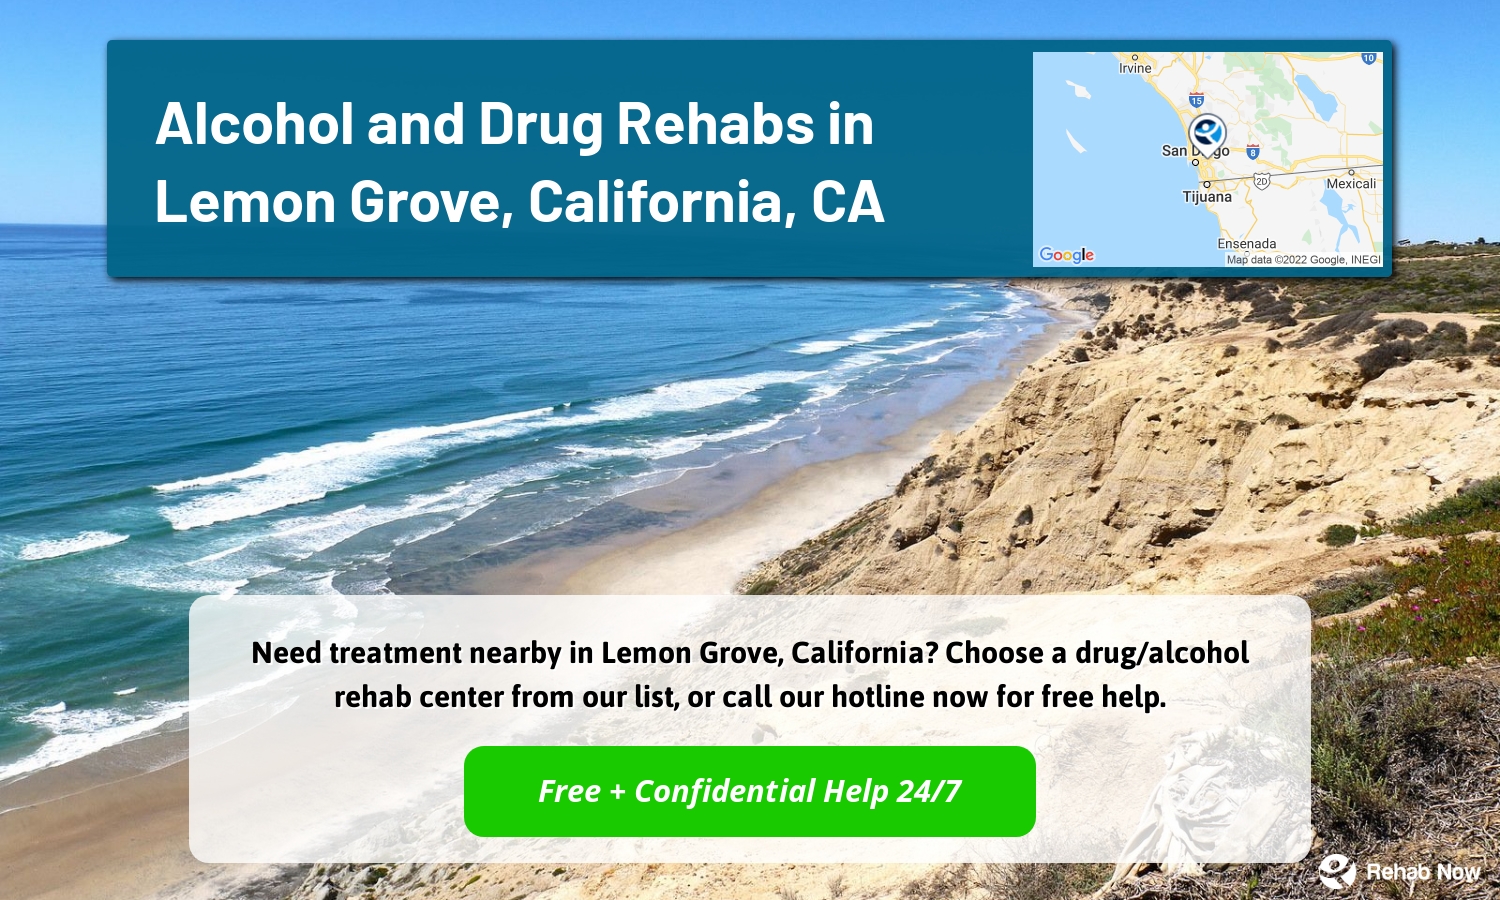 Need treatment nearby in Lemon Grove, California? Choose a drug/alcohol rehab center from our list, or call our hotline now for free help.